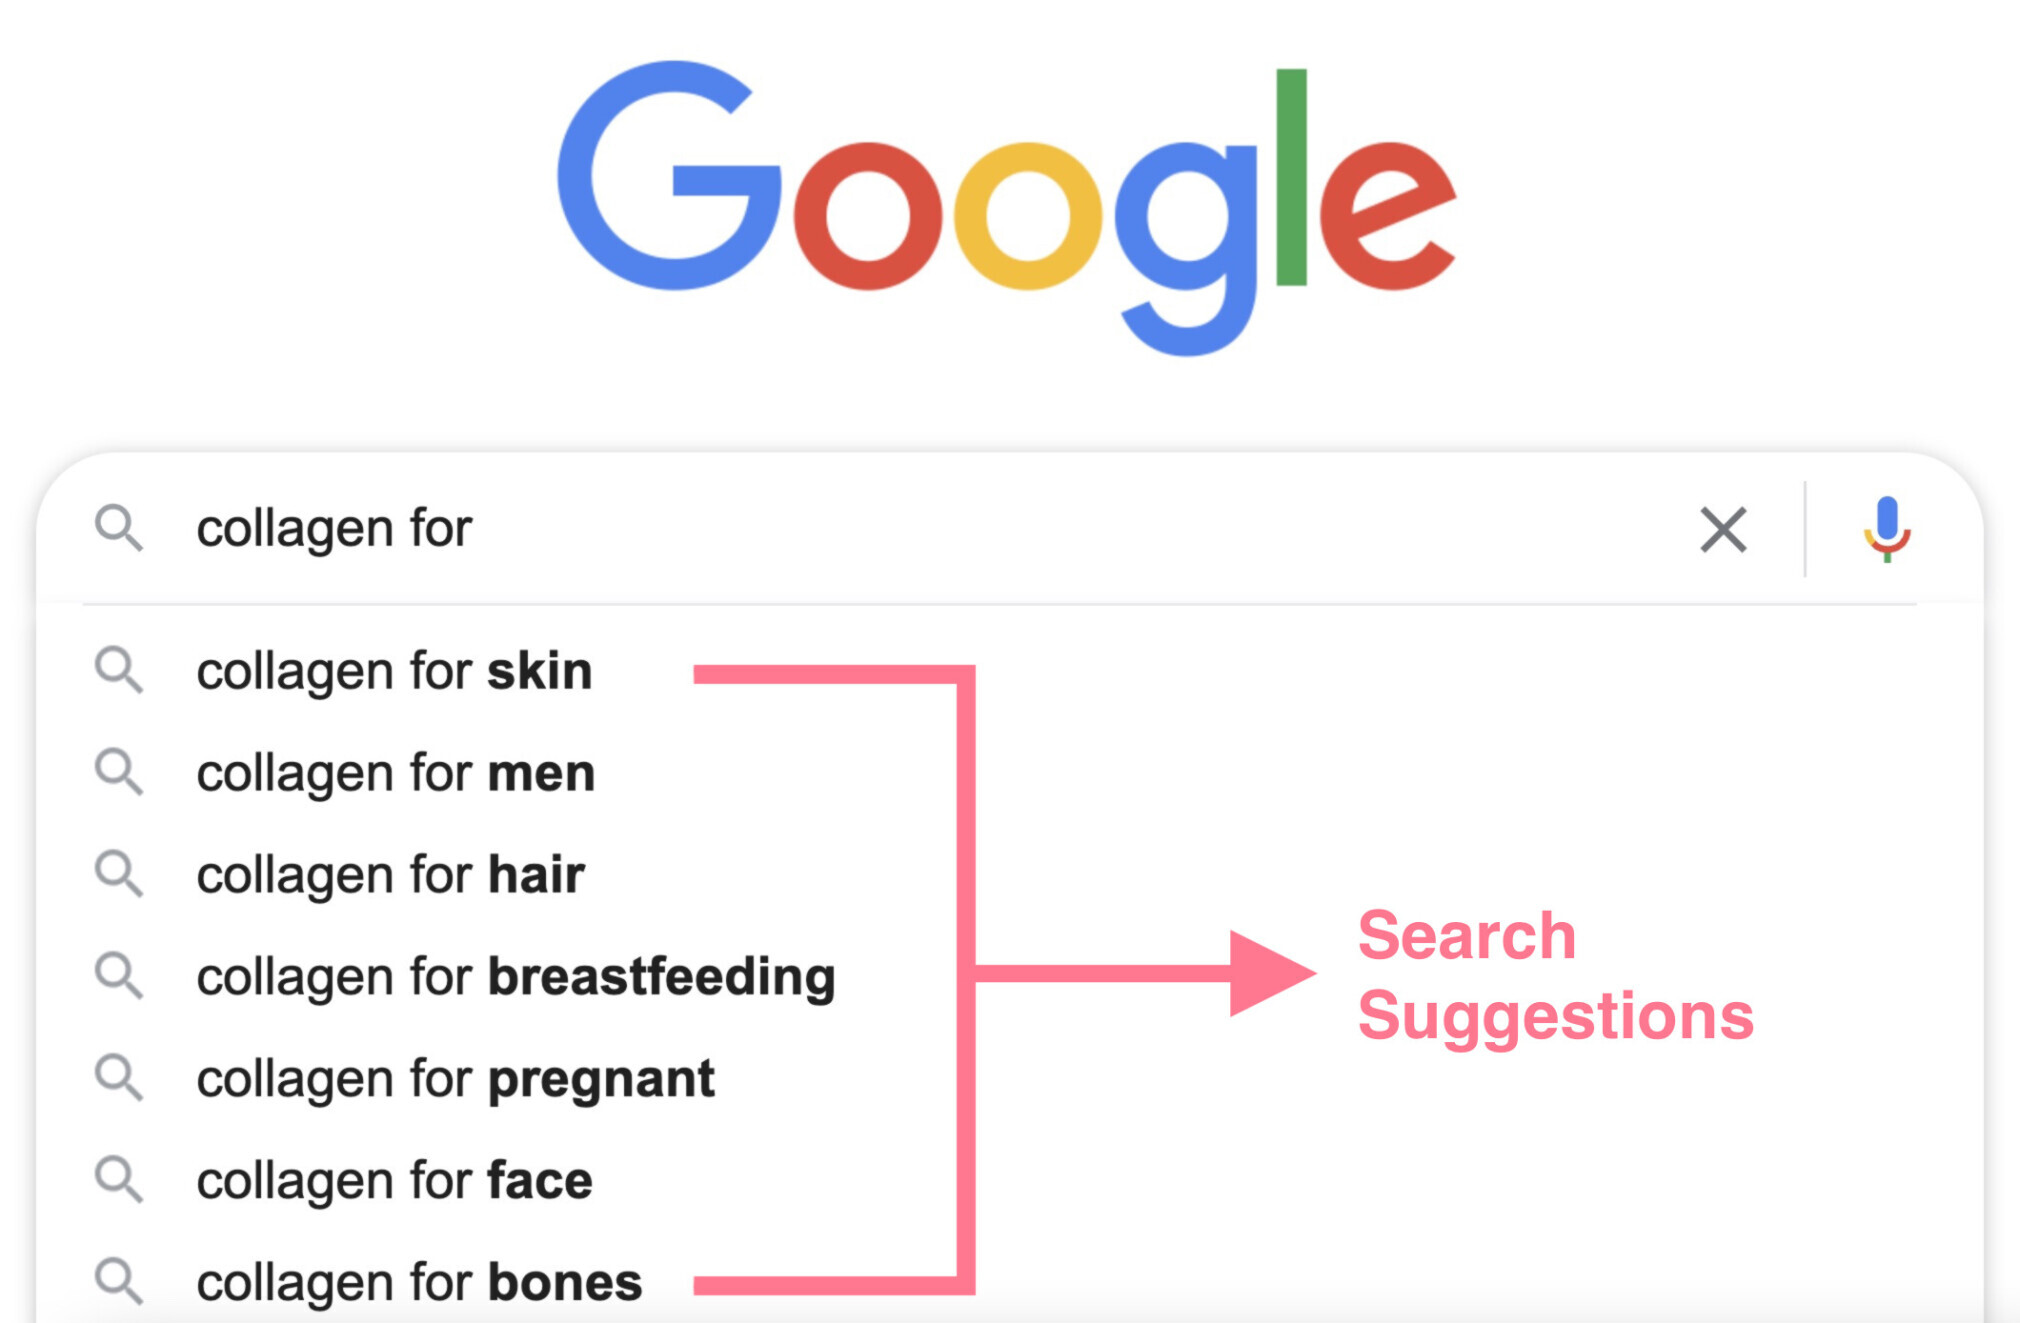 Seach suggestions for the keyword "collagen for"